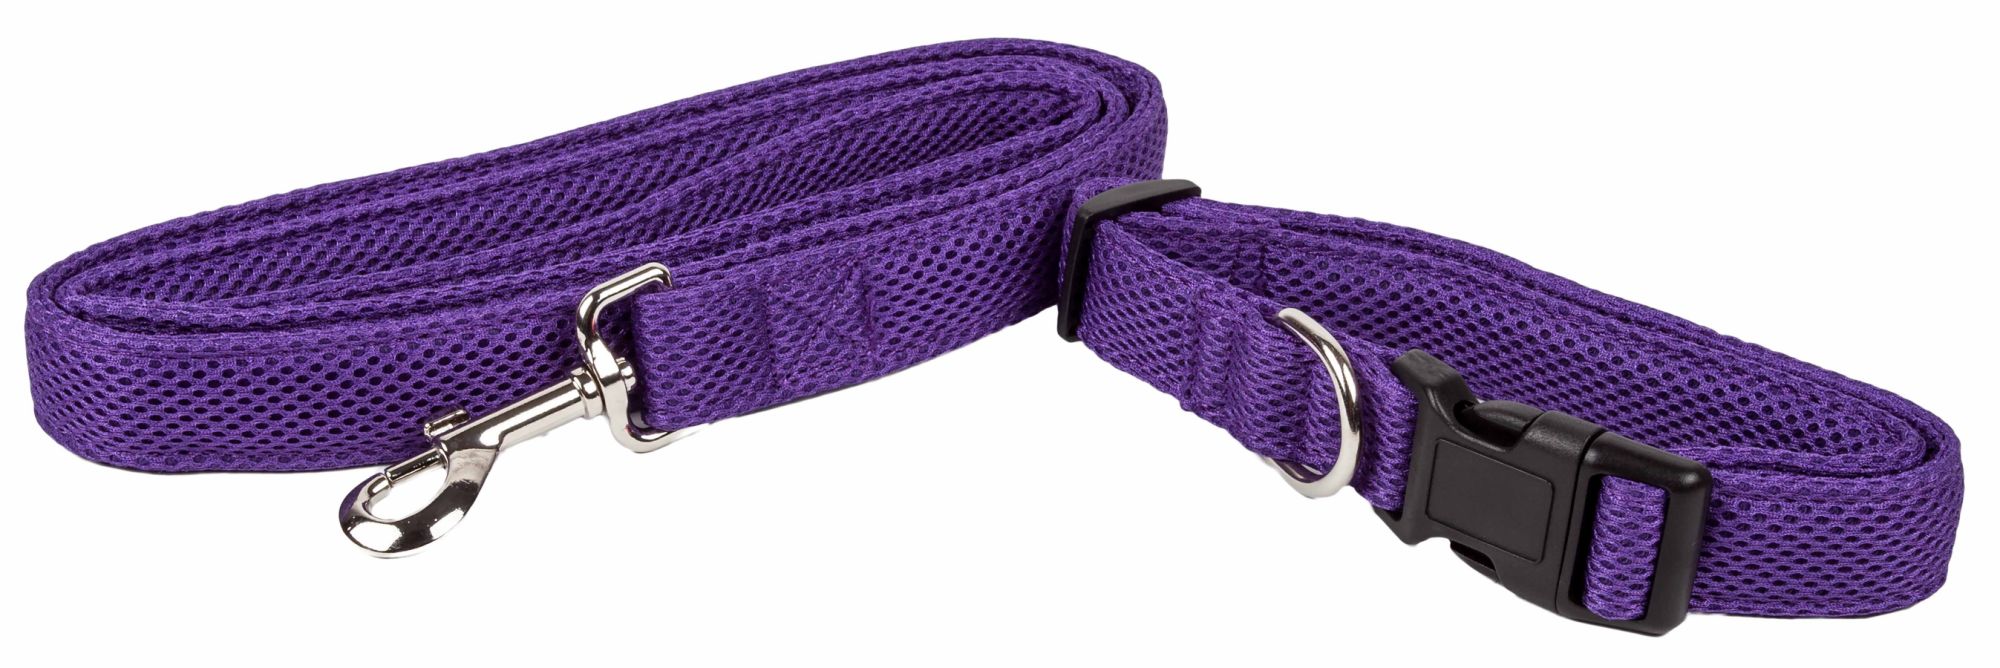 Pet Life  'Aero Mesh' 2-In-1 Dual Sided Comfortable And Breathable Adjustable Mesh Dog Leash-Collar